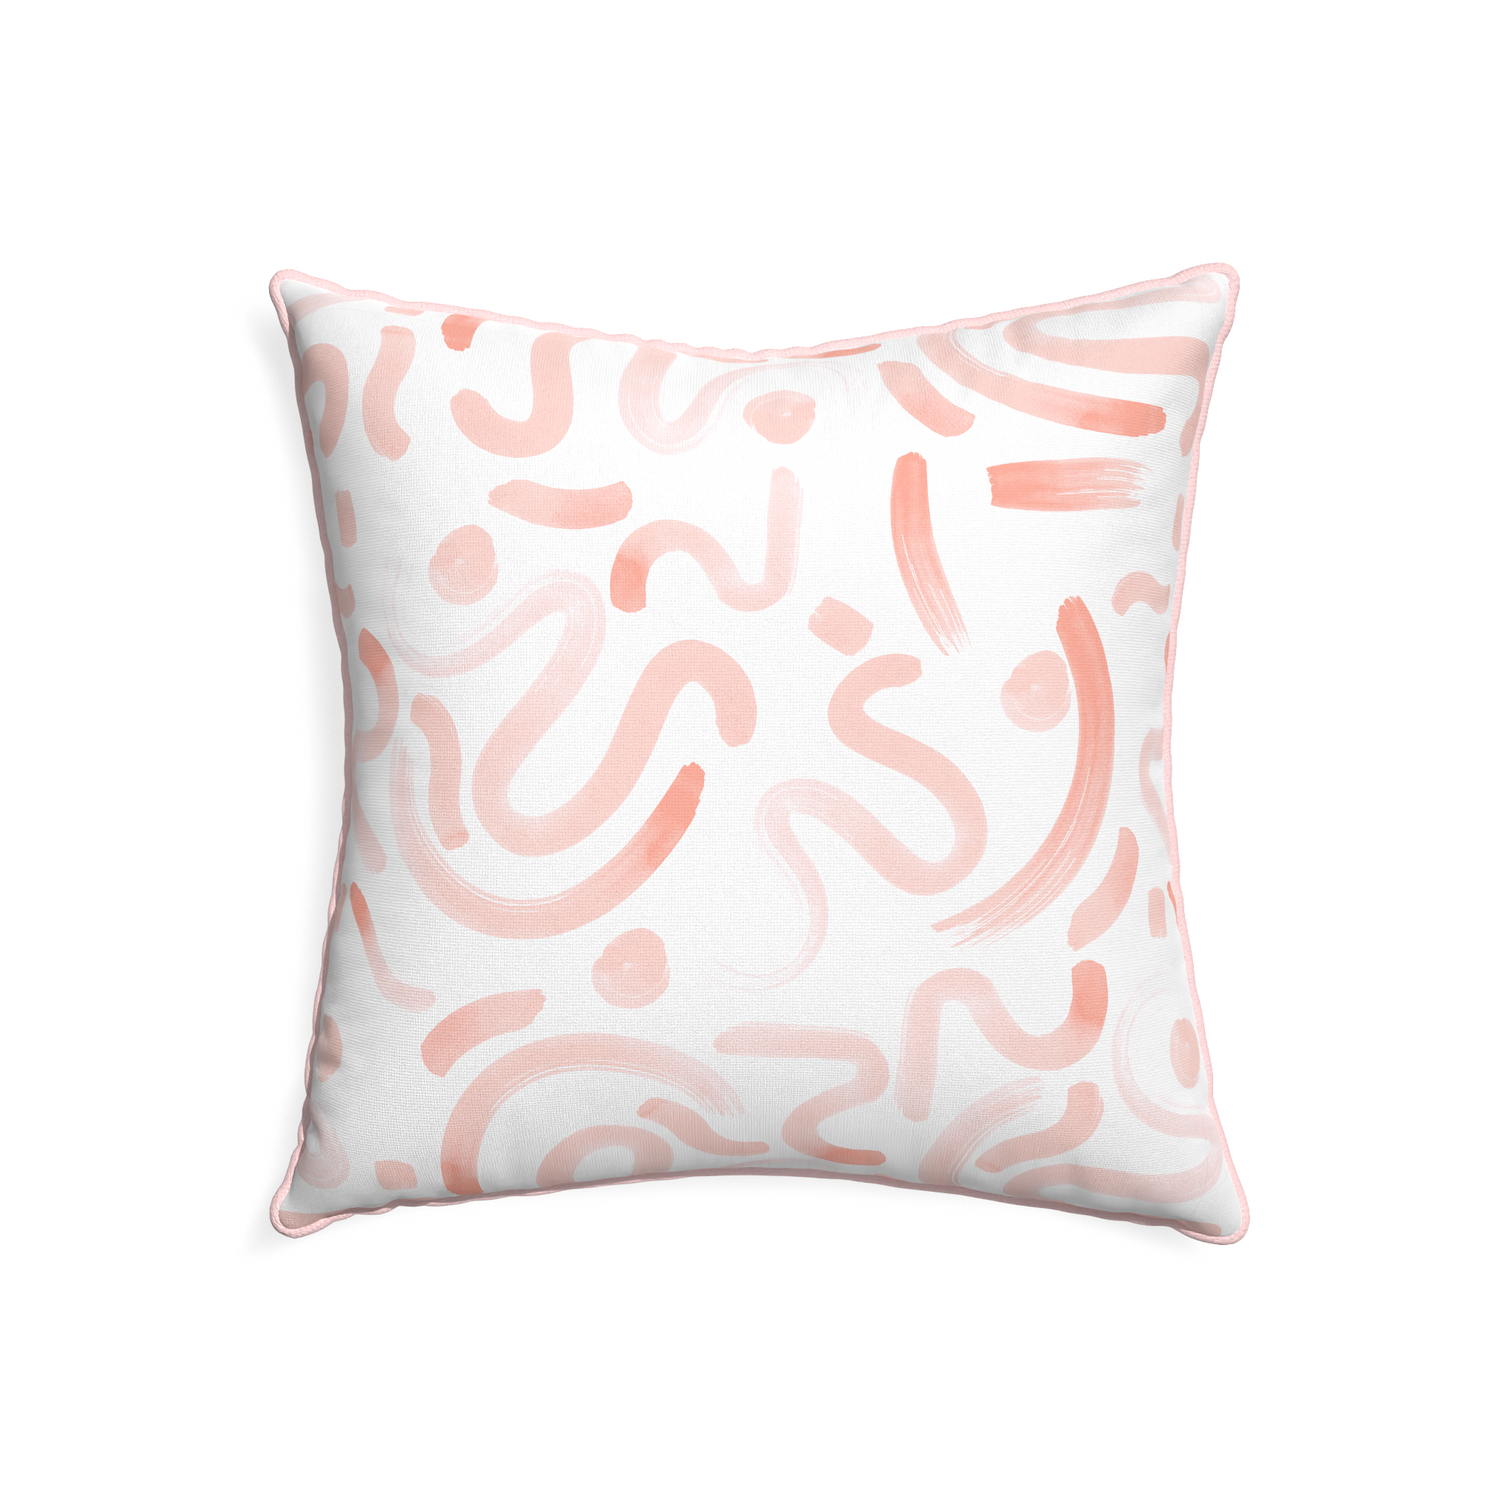 22-square hockney pink custom pink graphicpillow with petal piping on white background